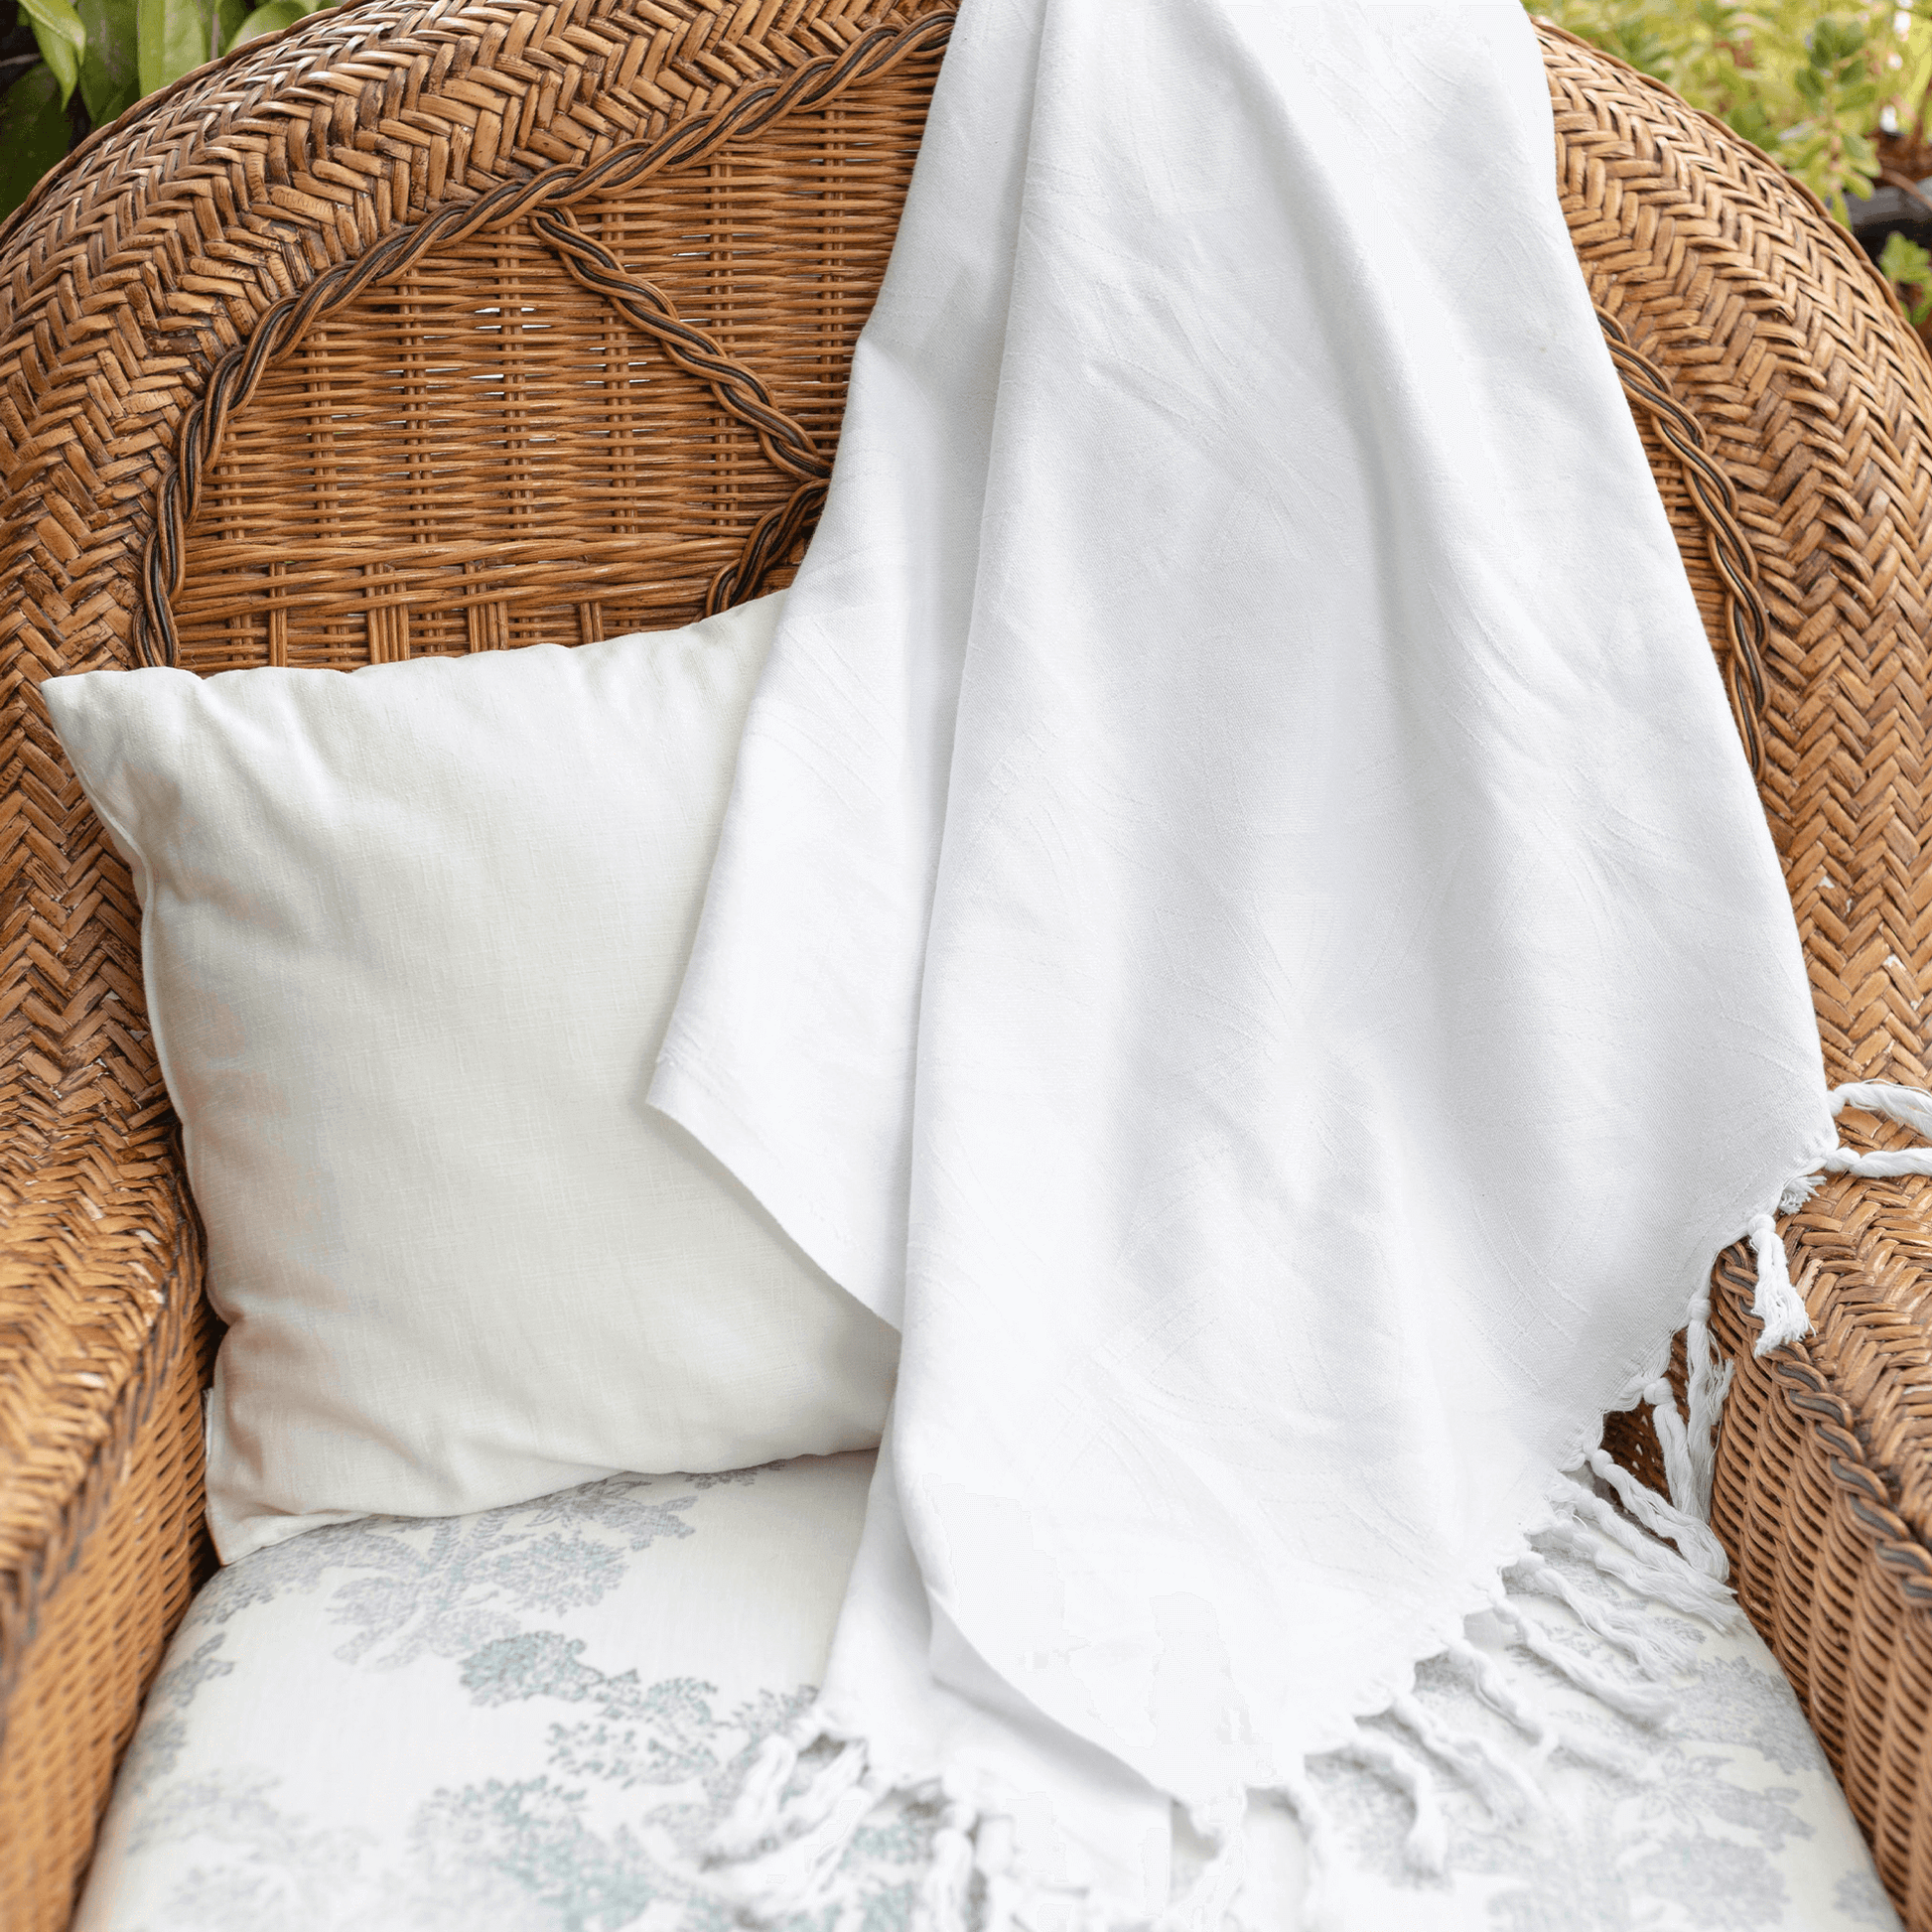 White Turkish towel used as home decor in upscale home